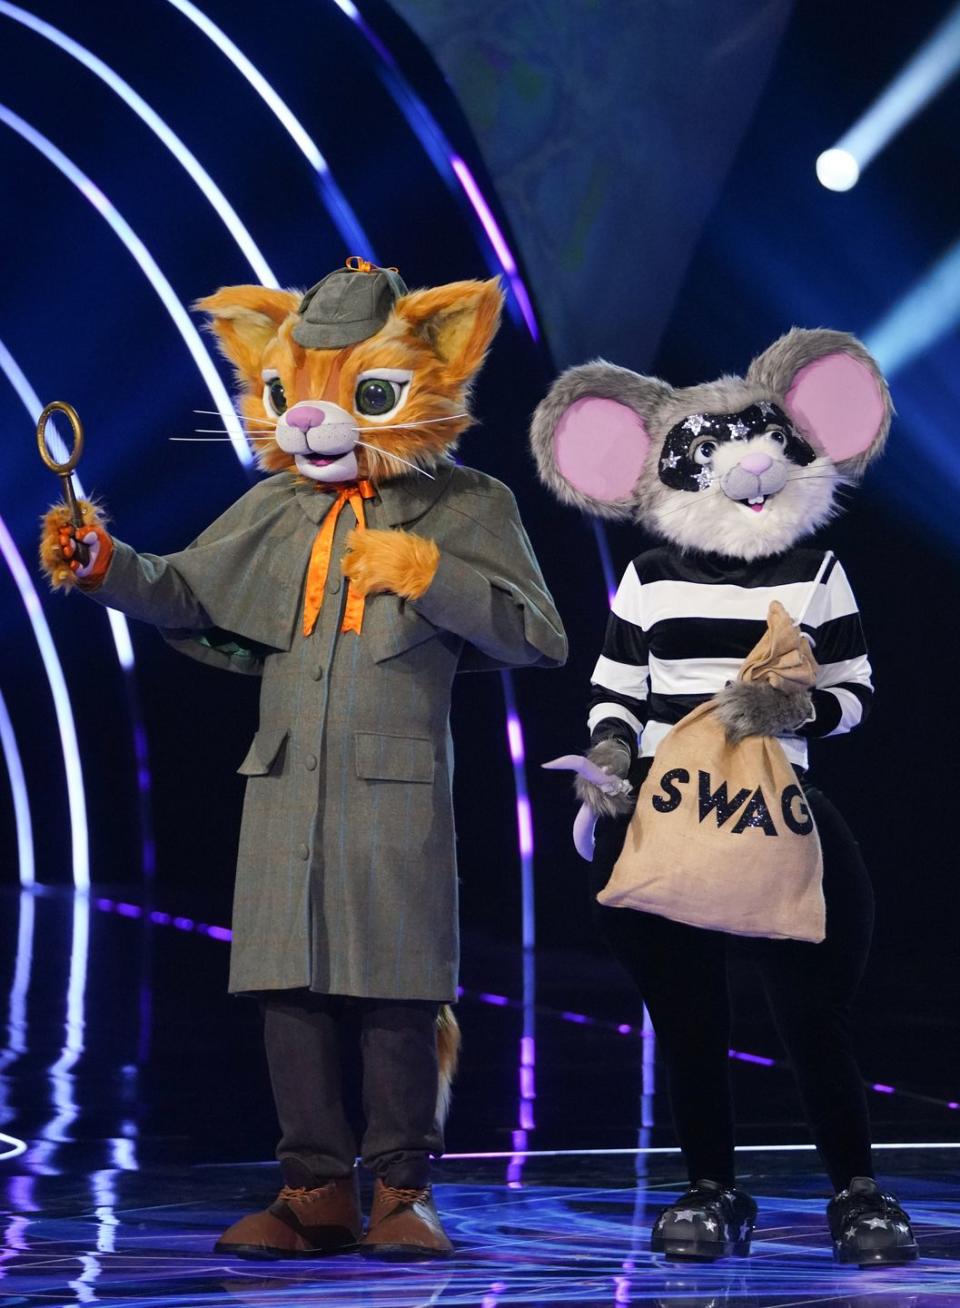 masked singer clues from bandicoot tvthe masked singer sr4 ep1 on itv1 and itvxpictured cat mousethis photograph is c bandicoot tv and can only be reproduced for editorial purposes directly in connection with the programme or event mentioned above, or itv plc once made available by itv plc picture desk, this photograph can be reproduced once only up until the transmission tx date and no reproduction fee will be charged any subsequent usage may incur a fee this photograph must not be manipulated excluding basic cropping in a manner which alters the visual appearance of the person photographed deemed detrimental or inappropriate by itv plc picture desk this photograph must not be syndicated to any other company, publication or website, or permanently archived, without the express written permission of itv picture desk full terms and conditions are available on the website wwwitvcompresscentreitvpicturestermsfor further information please contactjameshilderitvcom